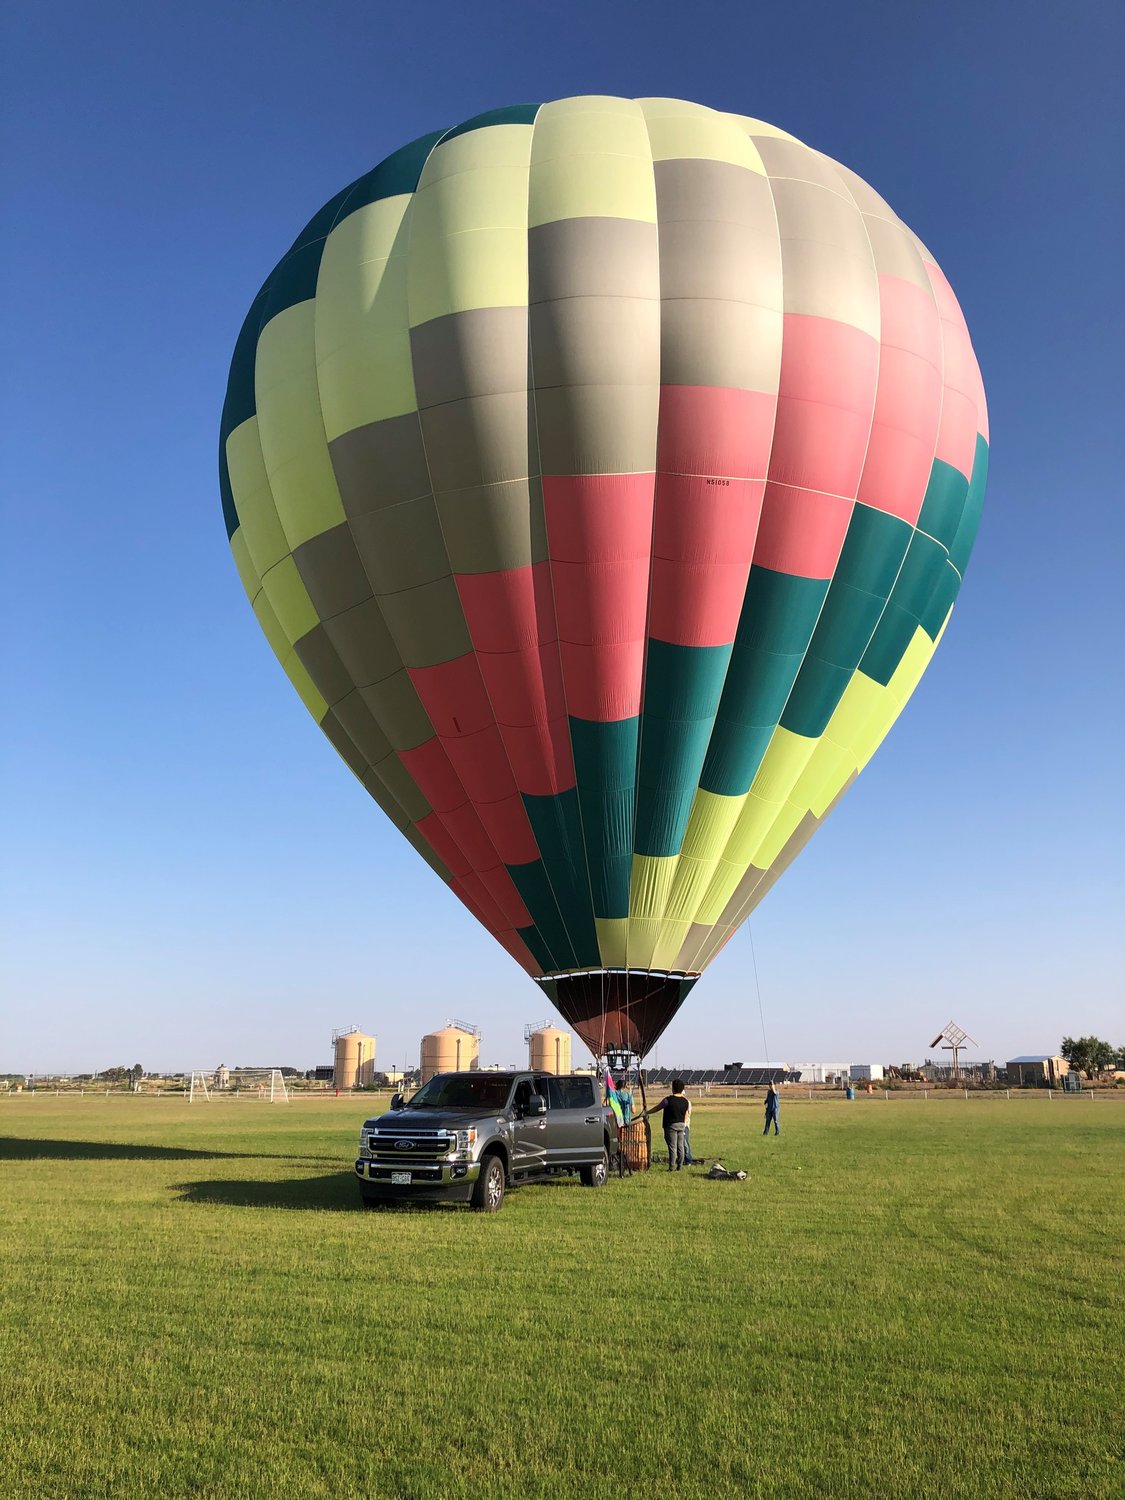 The “Flicker” hot air balloon, piloted by David Chelgren Jr., will participate in the 9.11 commemorative balloon glow on the grounds of the New Mexico Museum of Space History Saturday evening, September 11, beginning at approximately 7:45 pm. The event is not open to the public but will be visible throughout the community